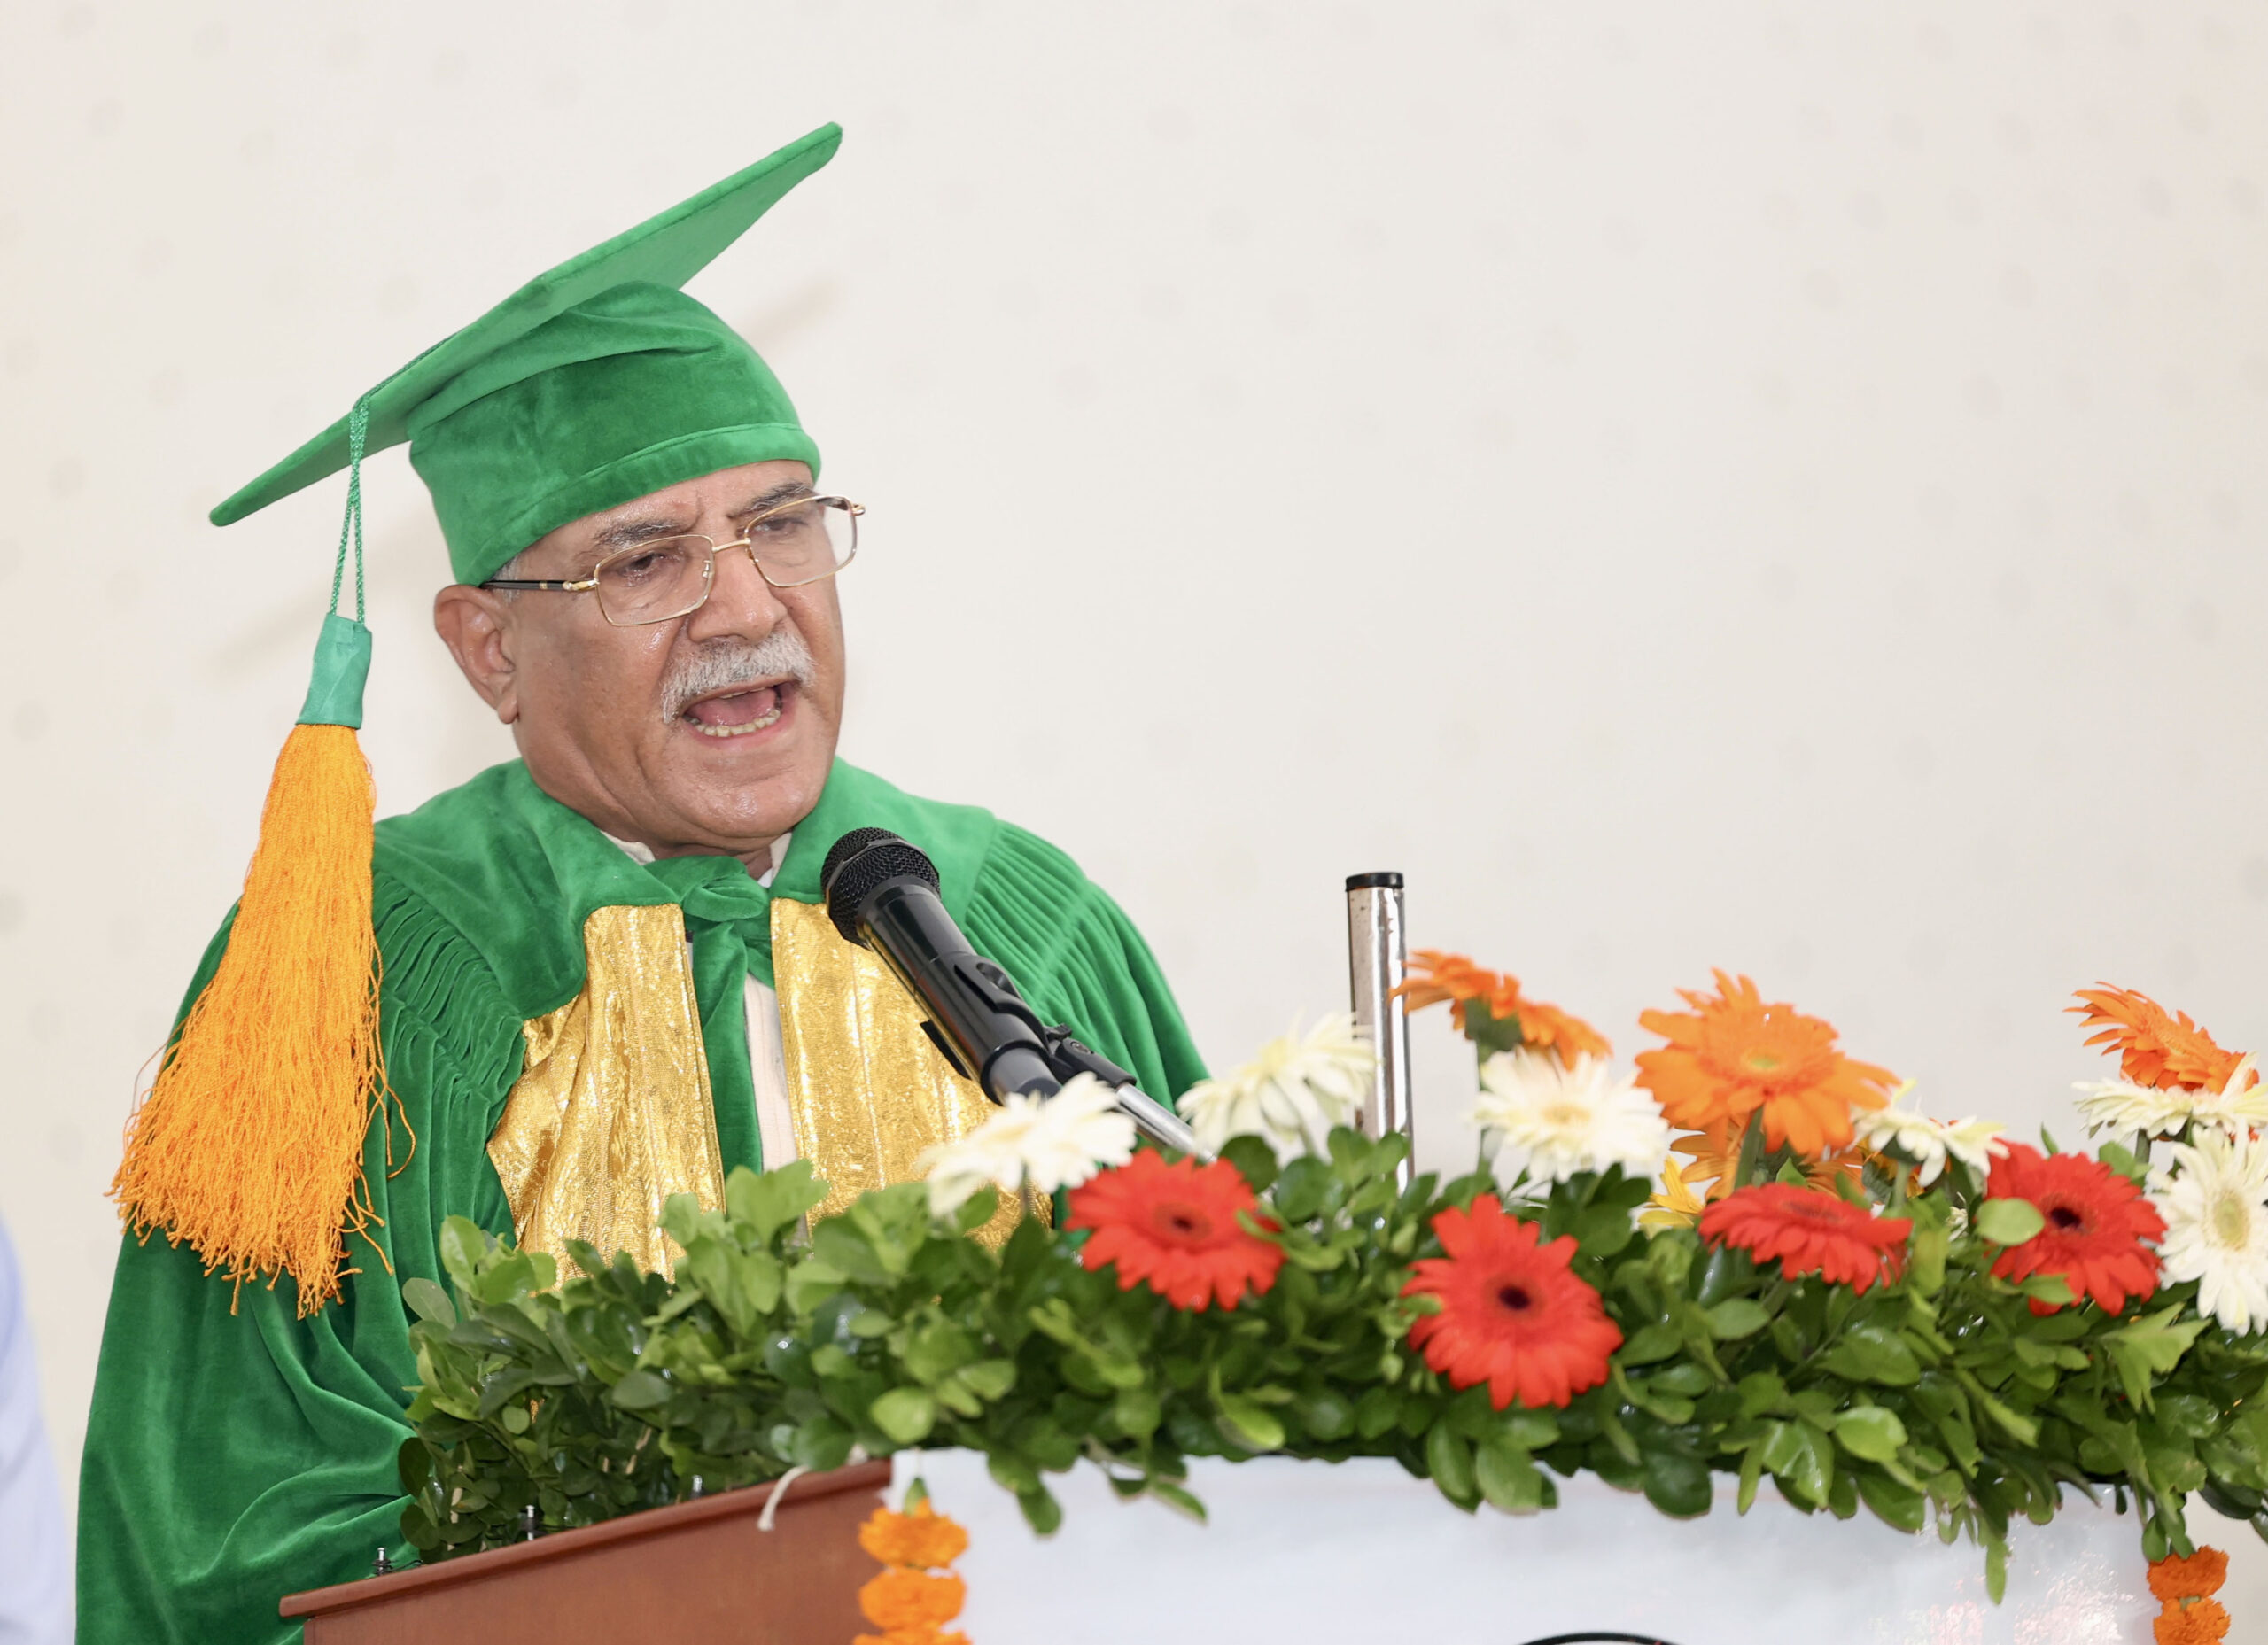 Let us give emphasis on quality education: PM Dahal